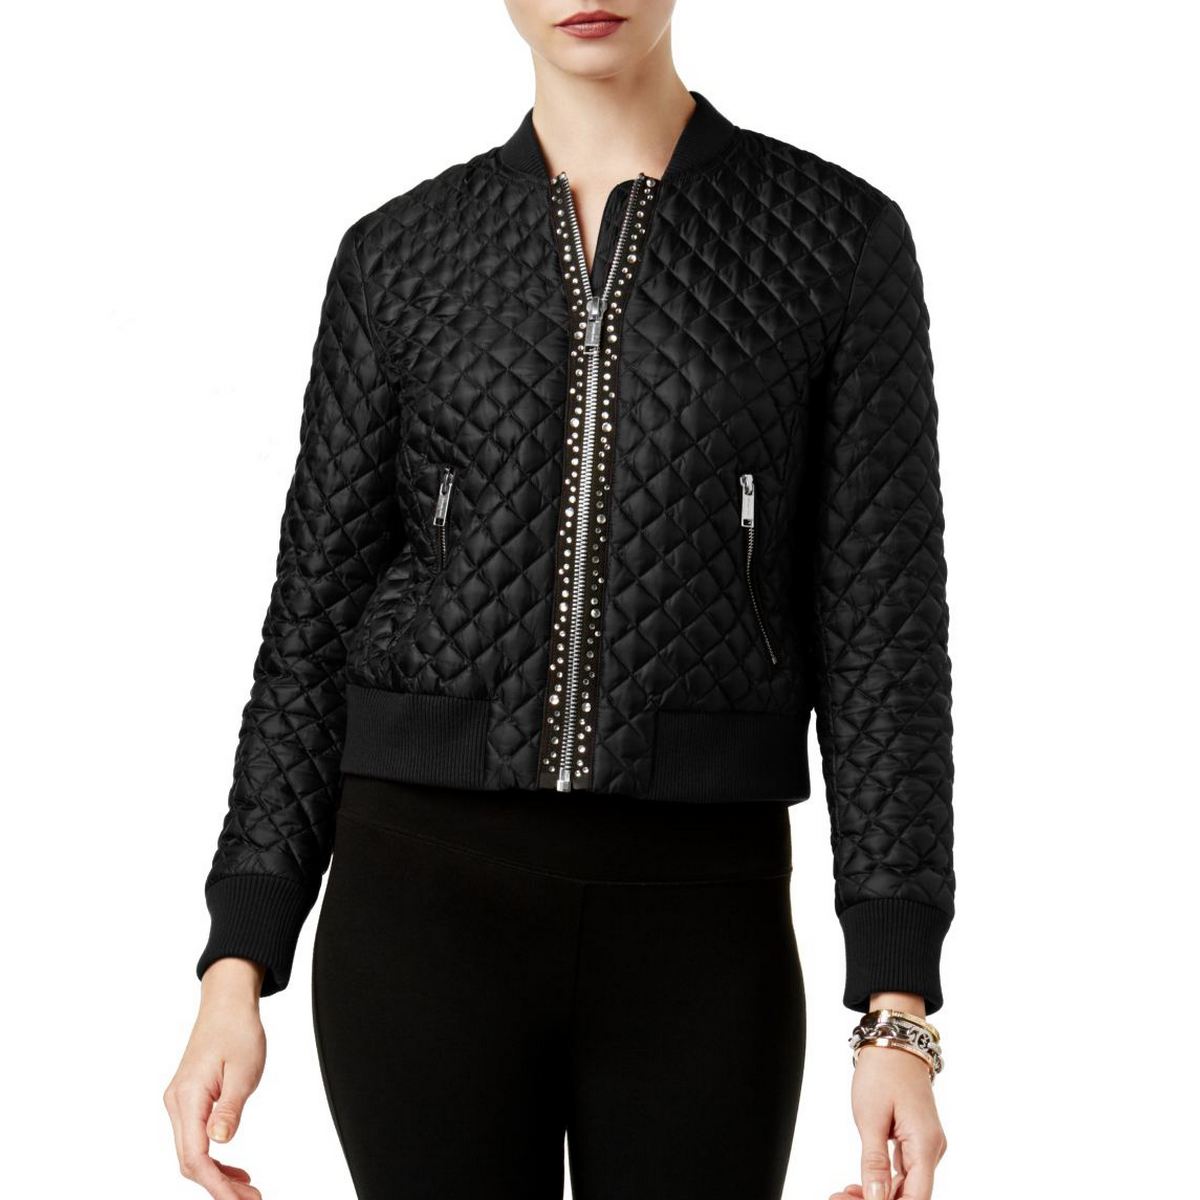 MICHAEL KORS NEW Women's Black Embellished Quilted Bomber Jacket Top XL ...